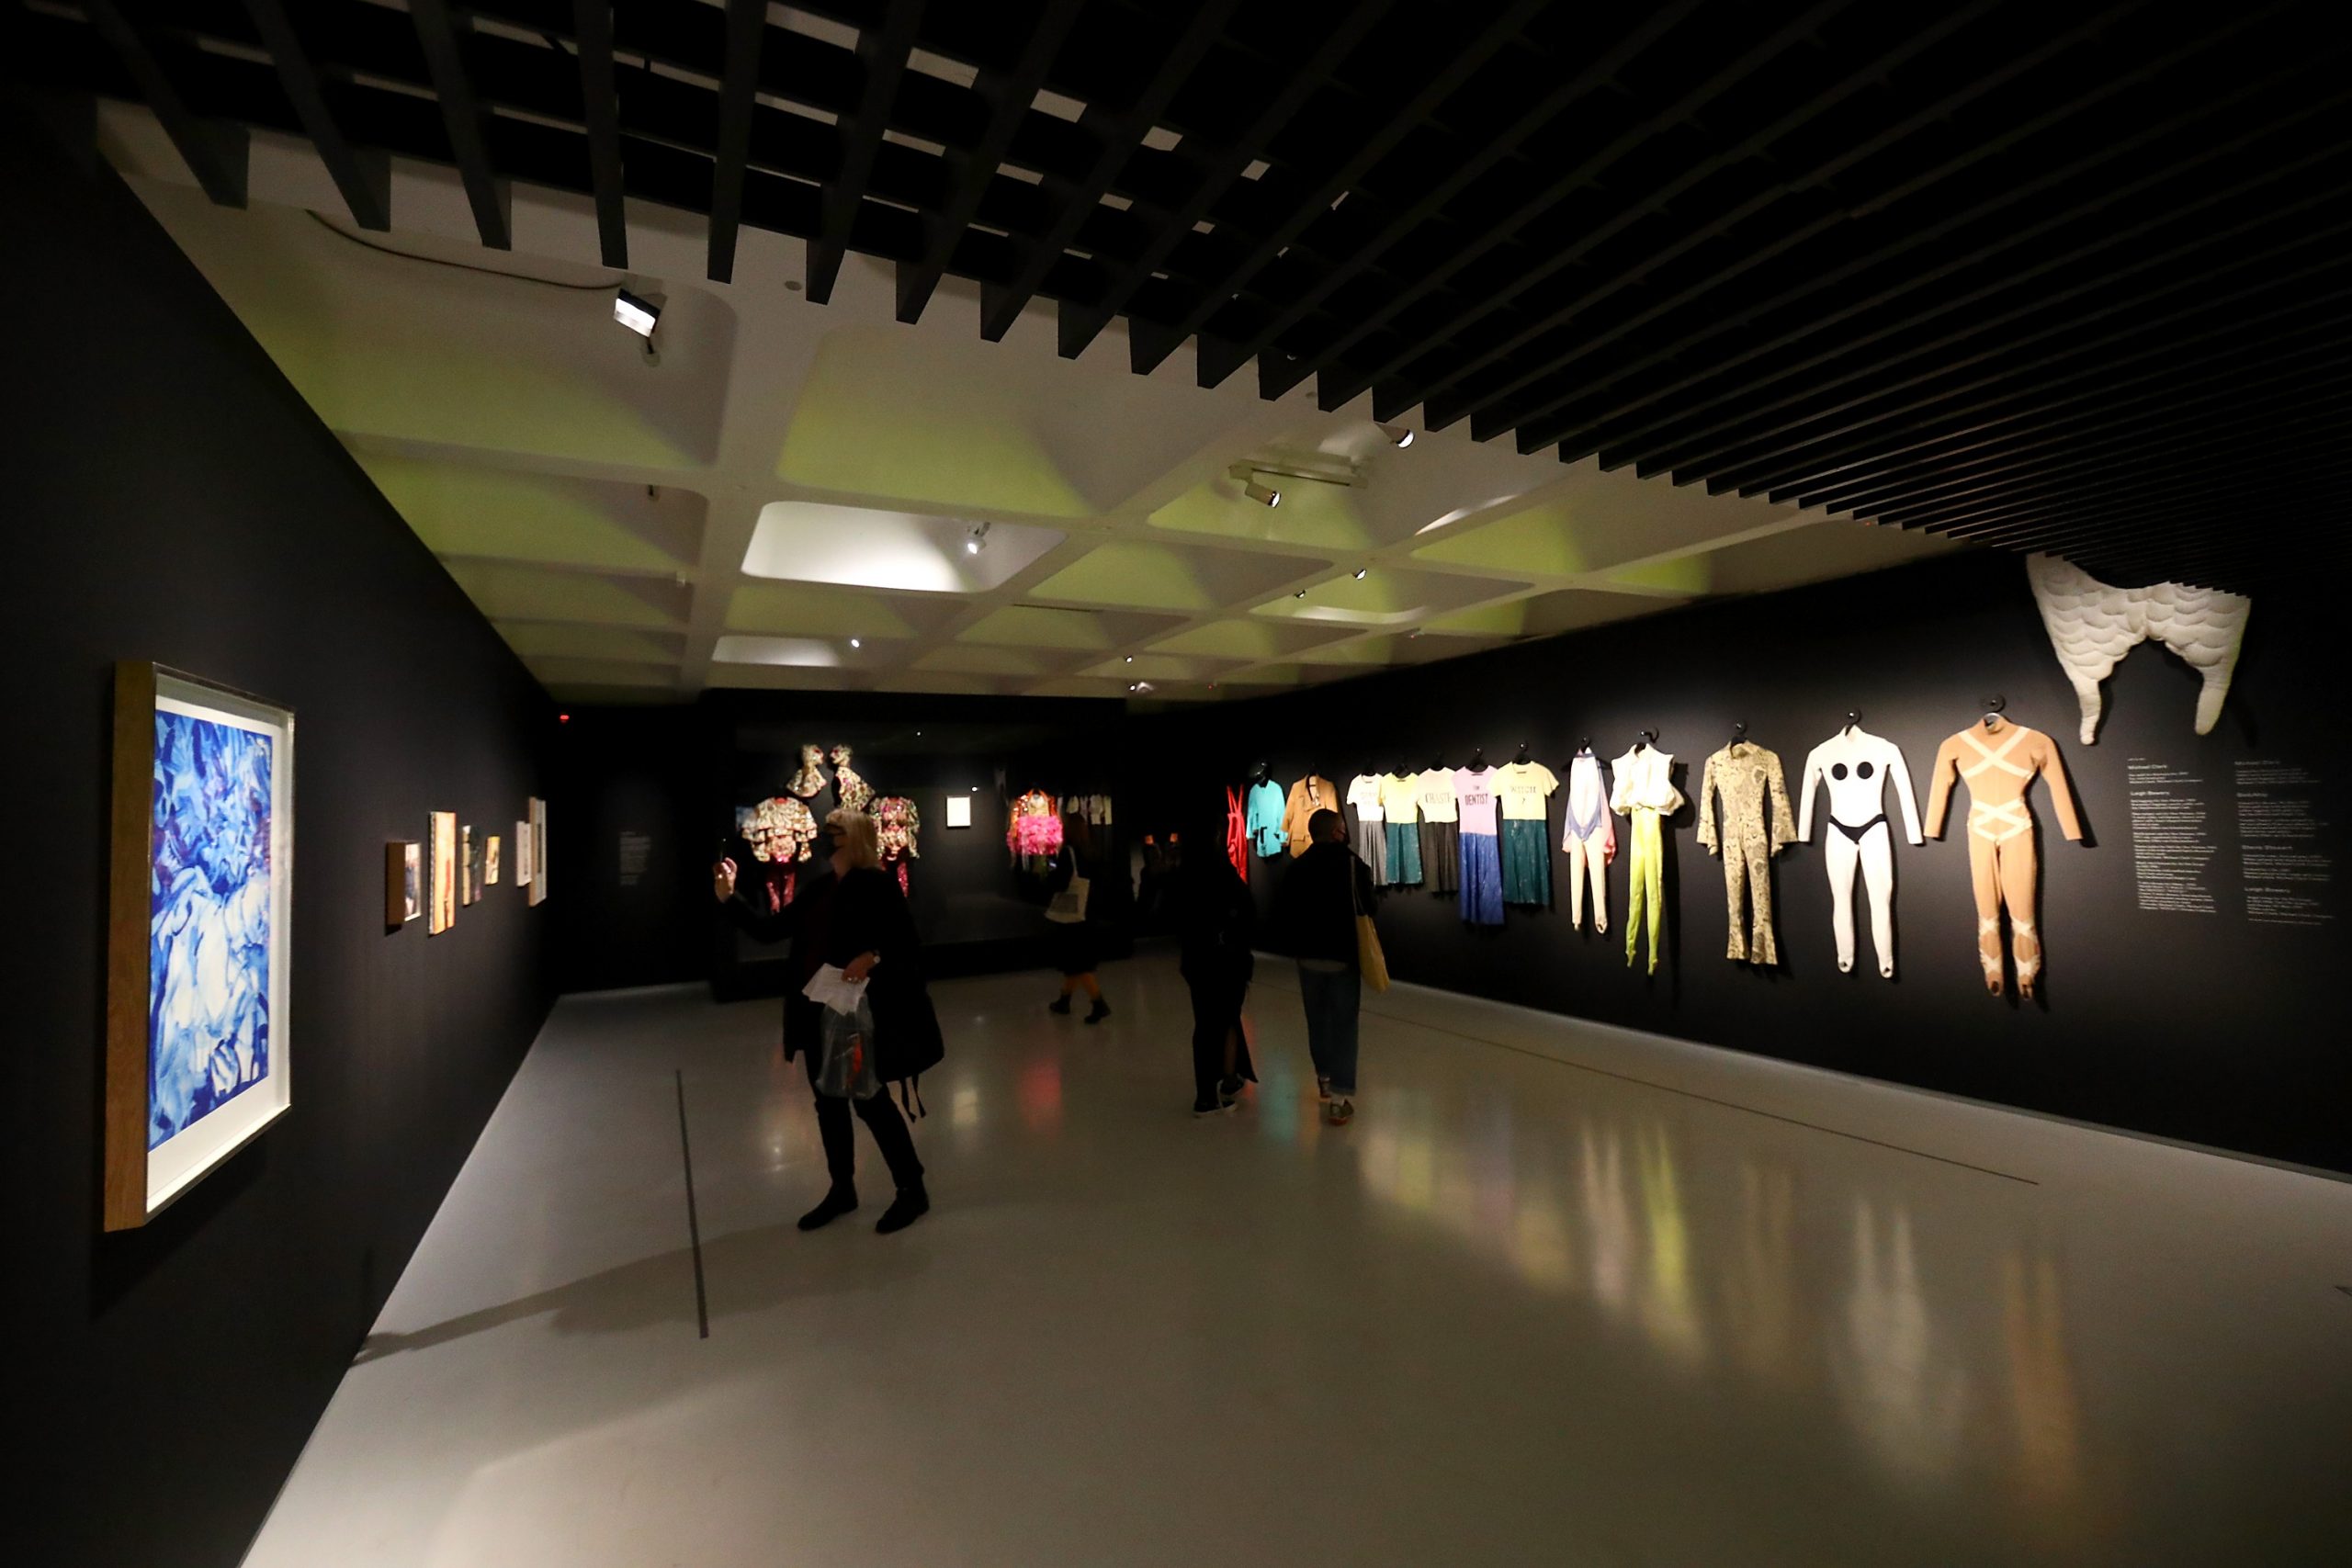 Installation View of room with works by Elizabeth Peyton, Leigh Bowery, BodyMap and Stevie Stewart Barbican Art Gallery 7 October 2020 – 3 January 2021 © Tim Whitby/Getty Images